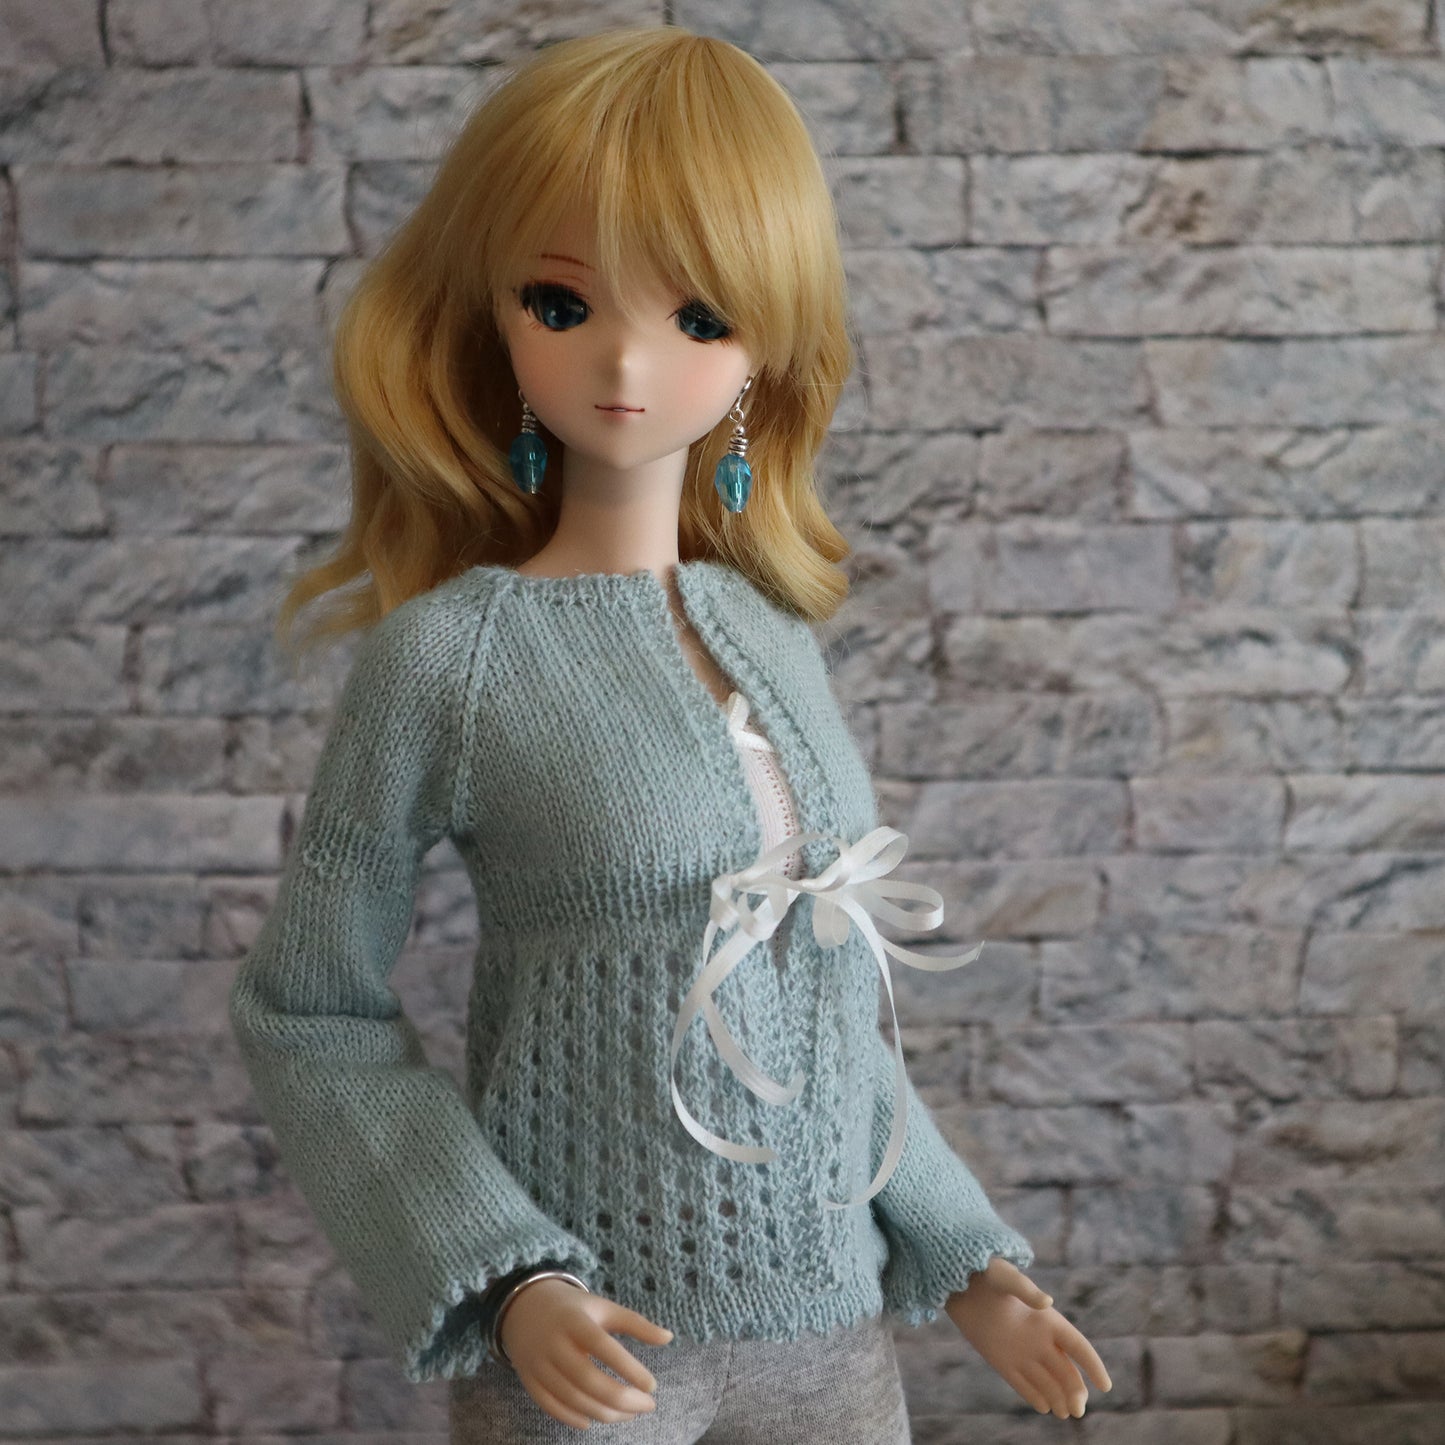 Pattern for Smartdoll - Romantic Knitted Lace Jacket